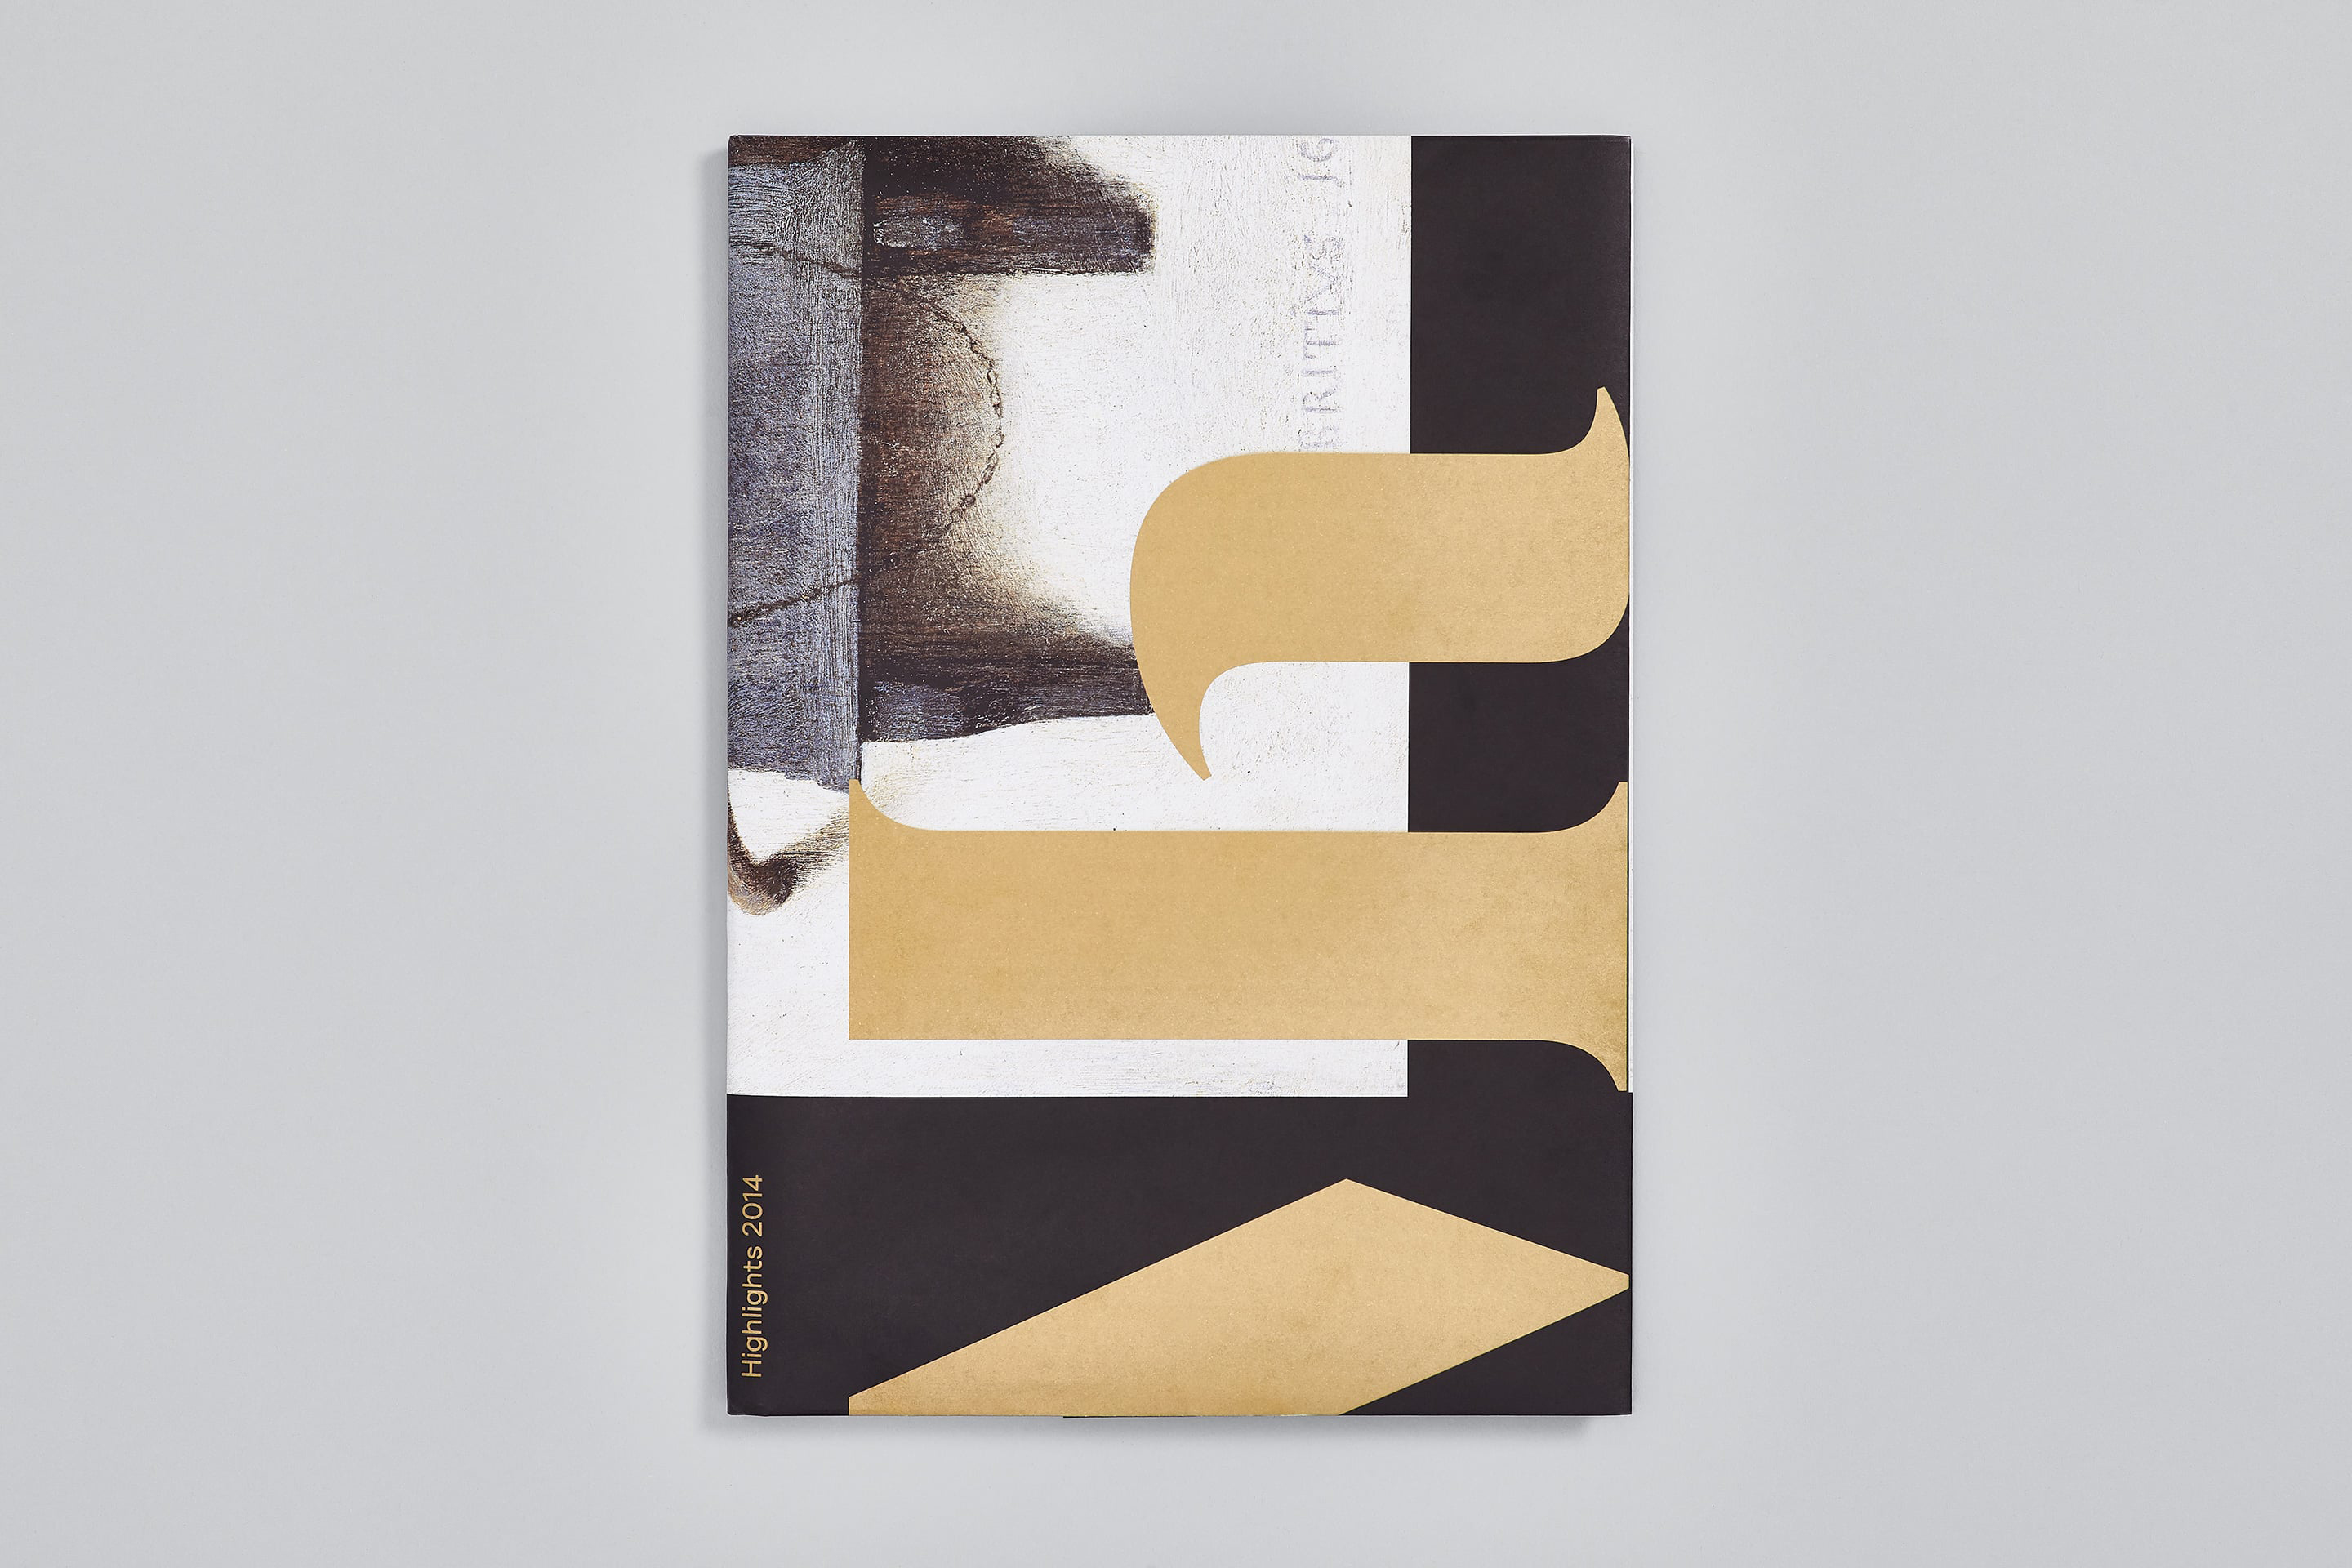 studio dumbar design visual brand identity for Mauritshuis Royal Picture Gallery annual report design